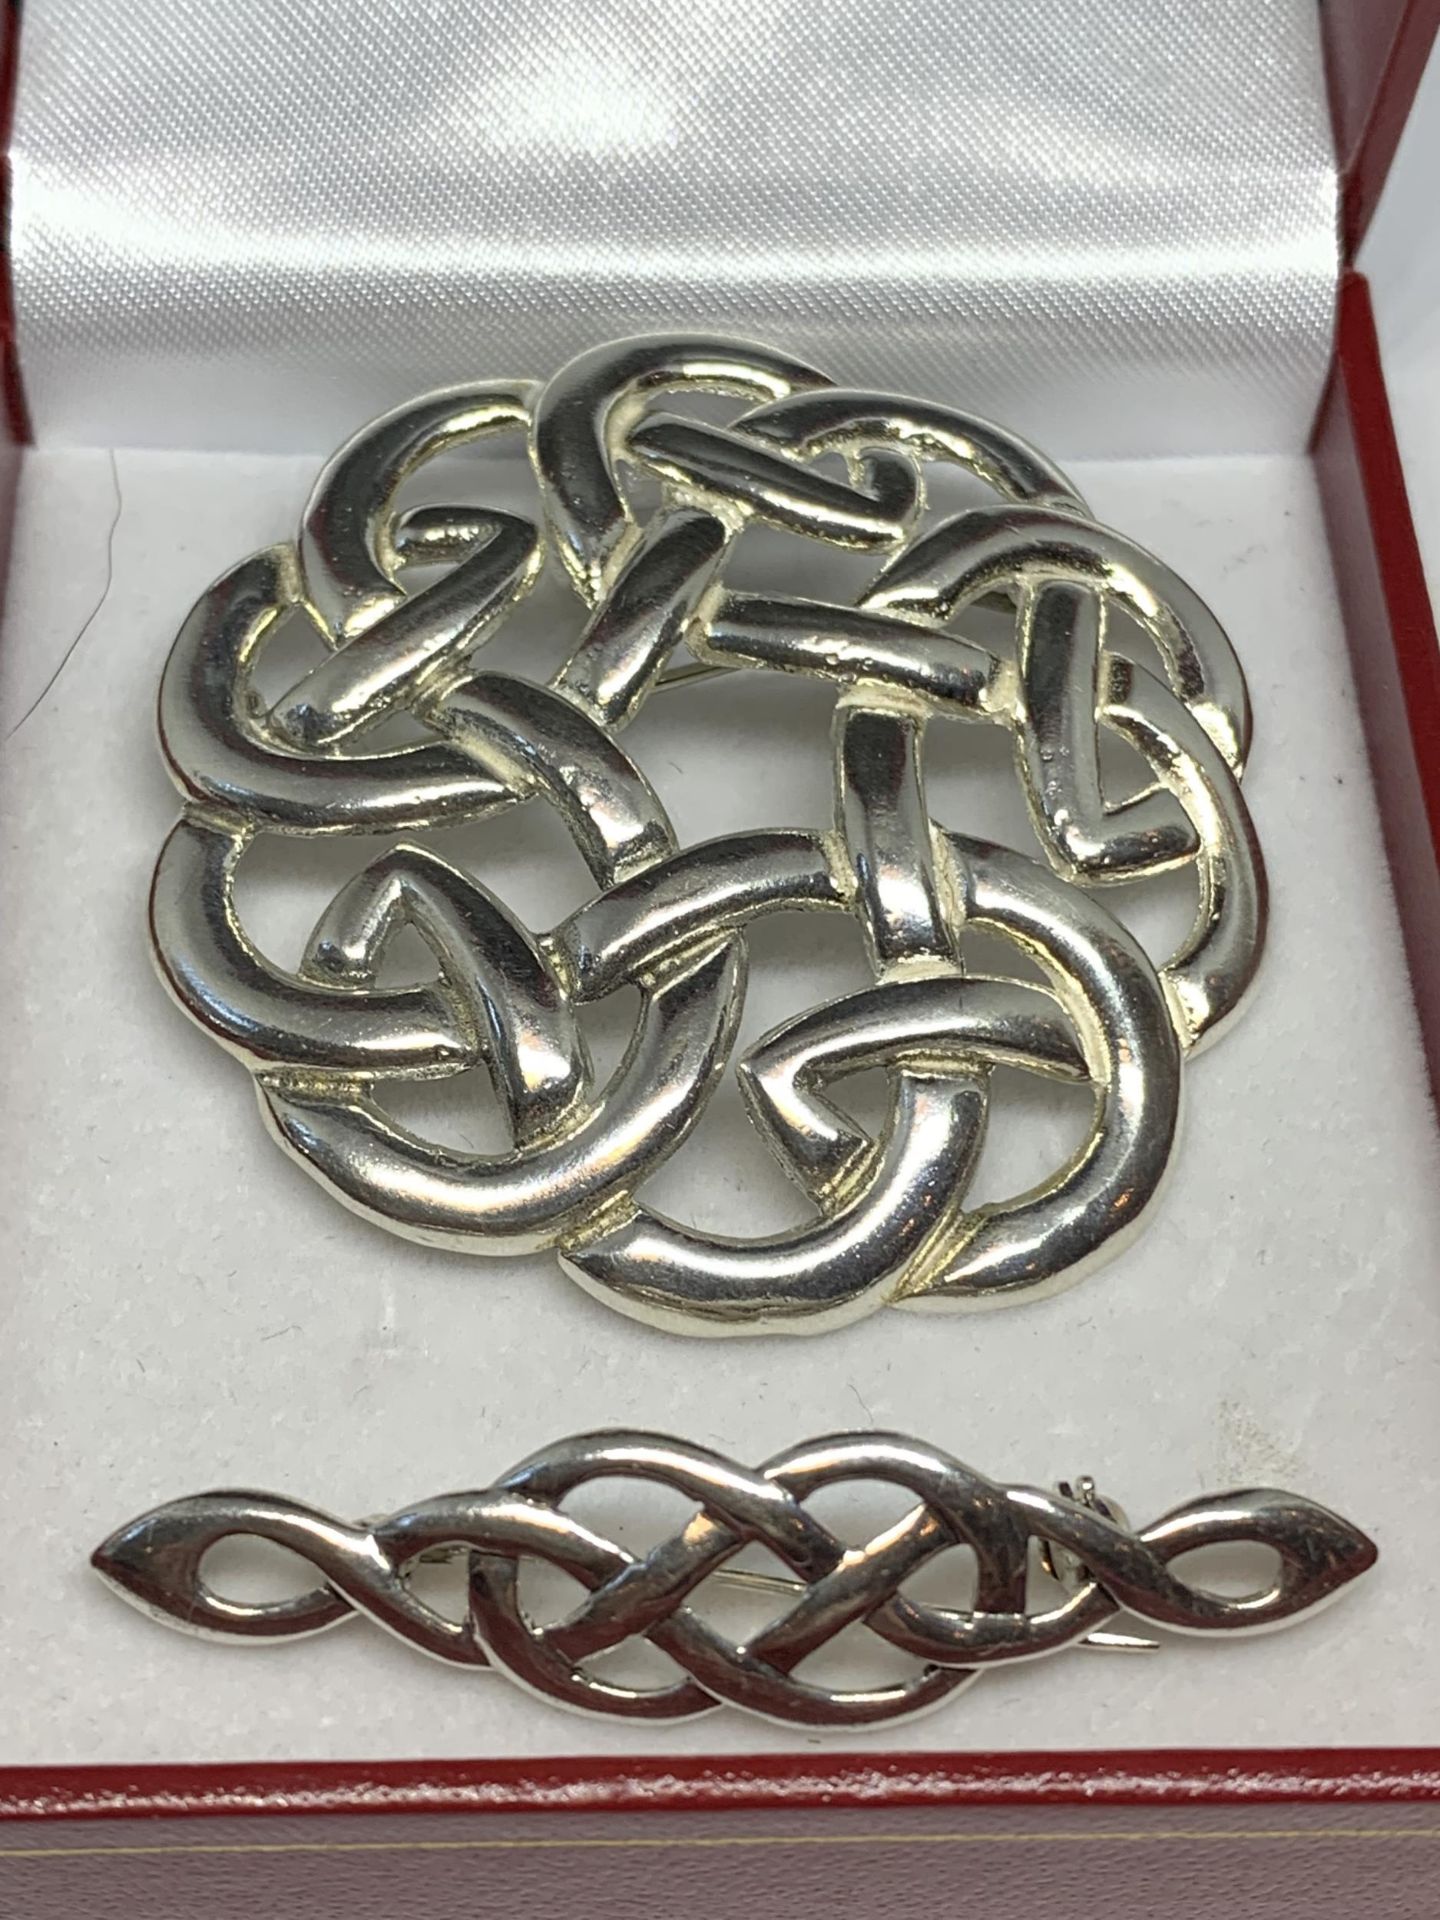 TWO MARKED SILVER CELTIC STYLE BROOCHES IN A PRESENTATION BOX - Image 2 of 3